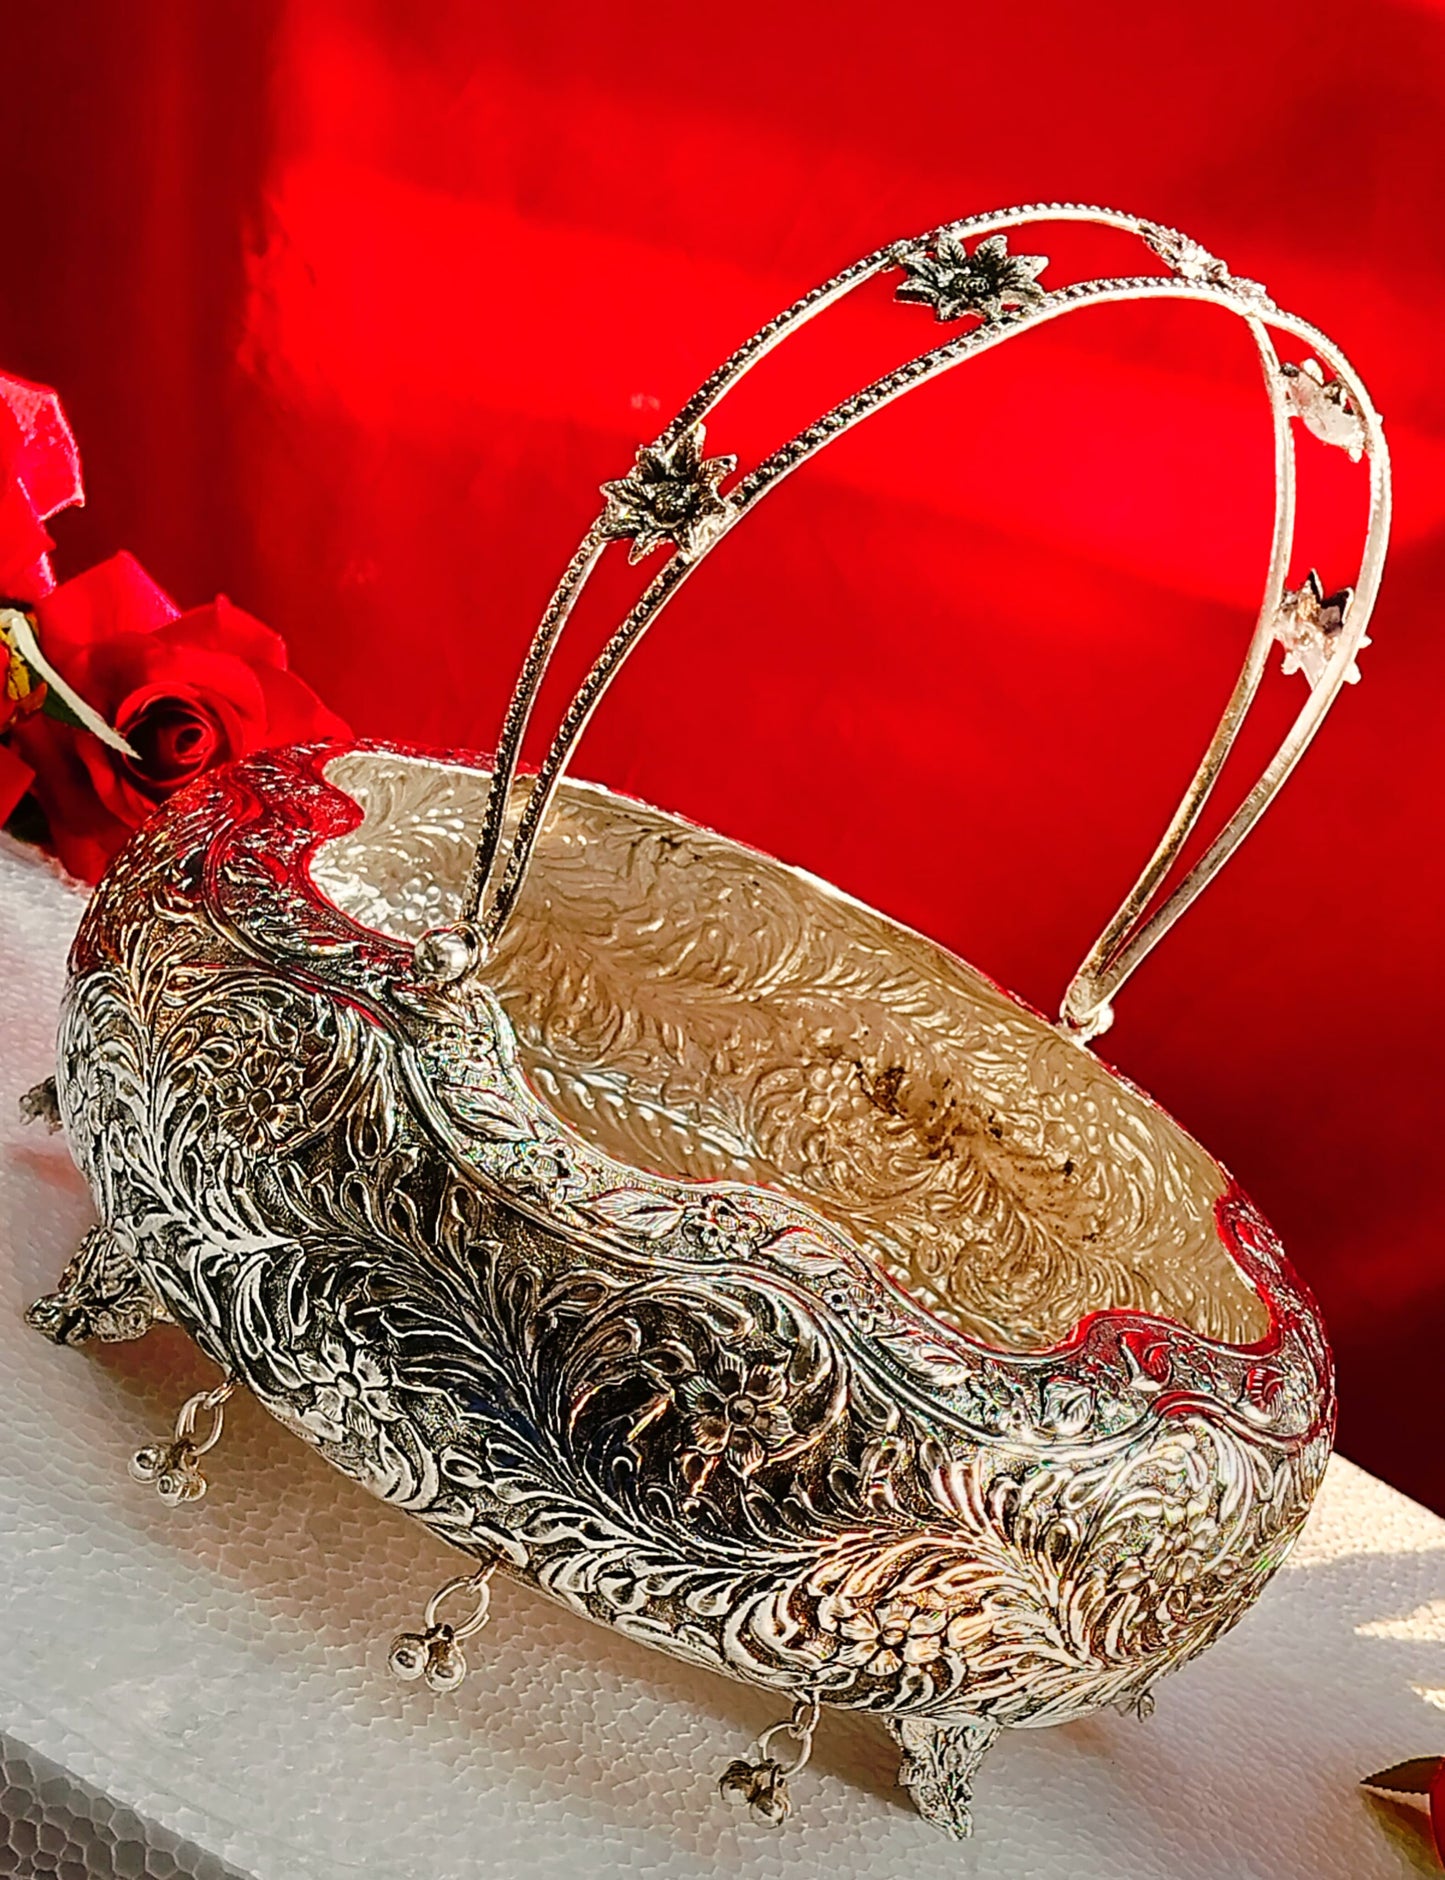 German Silver Antique Basket | Premium Silver Plated Basket with Handle